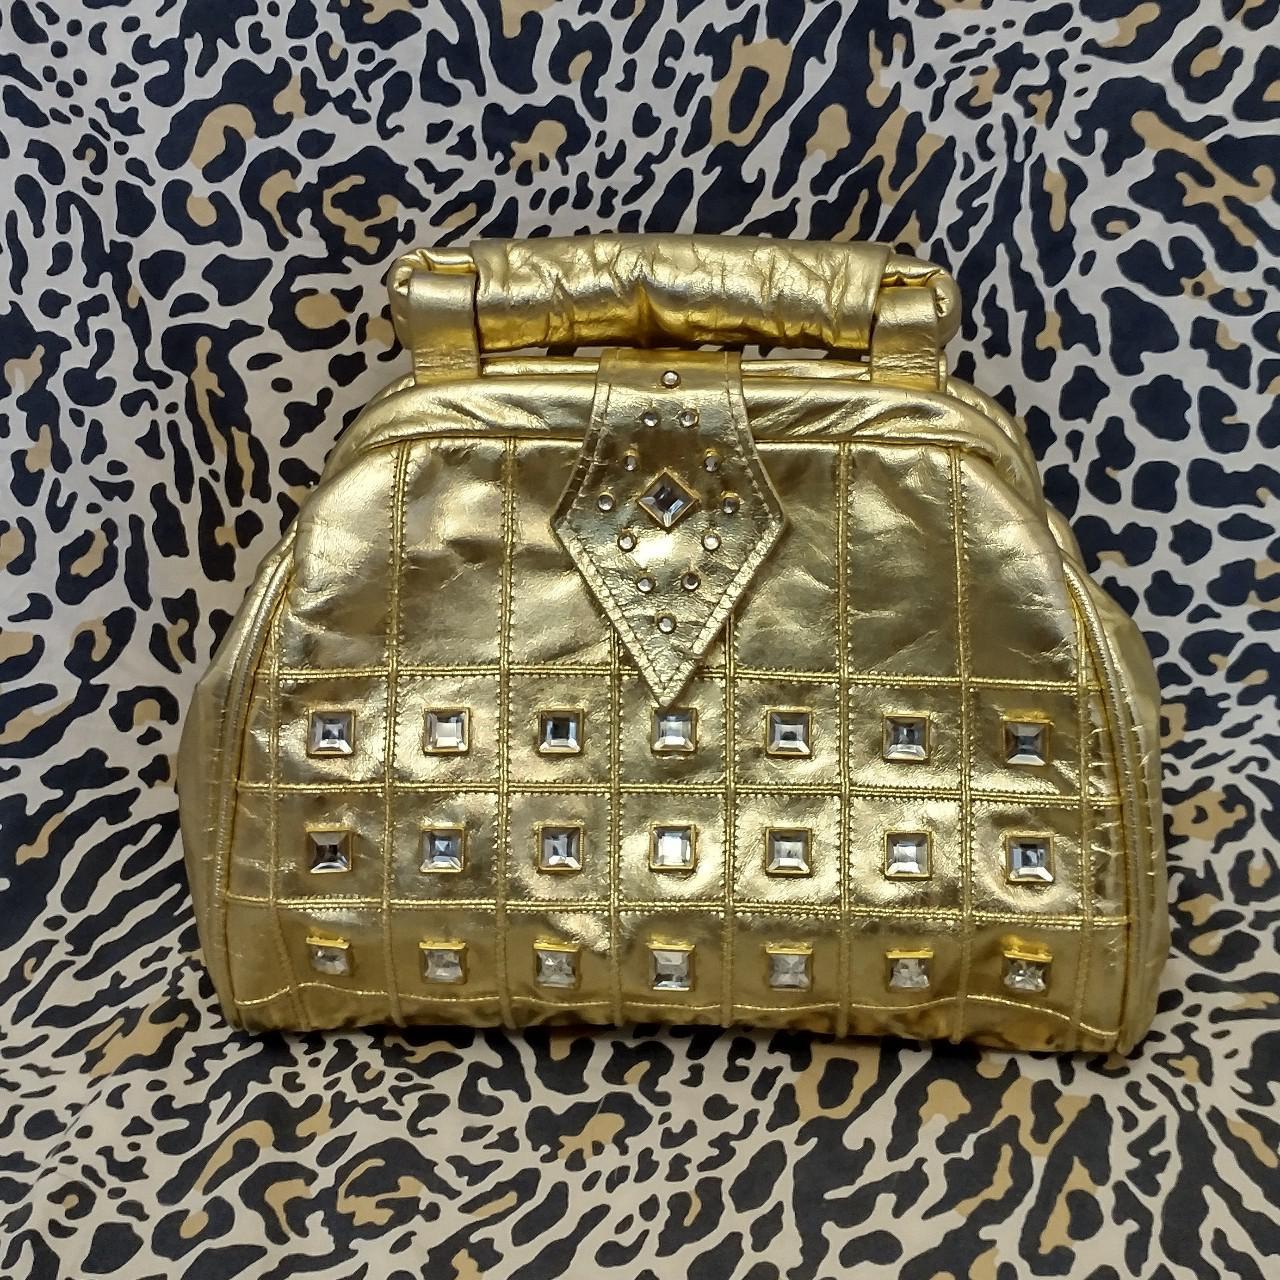 Product Image 1 - Vintage Gold and Bedazzled Handbag